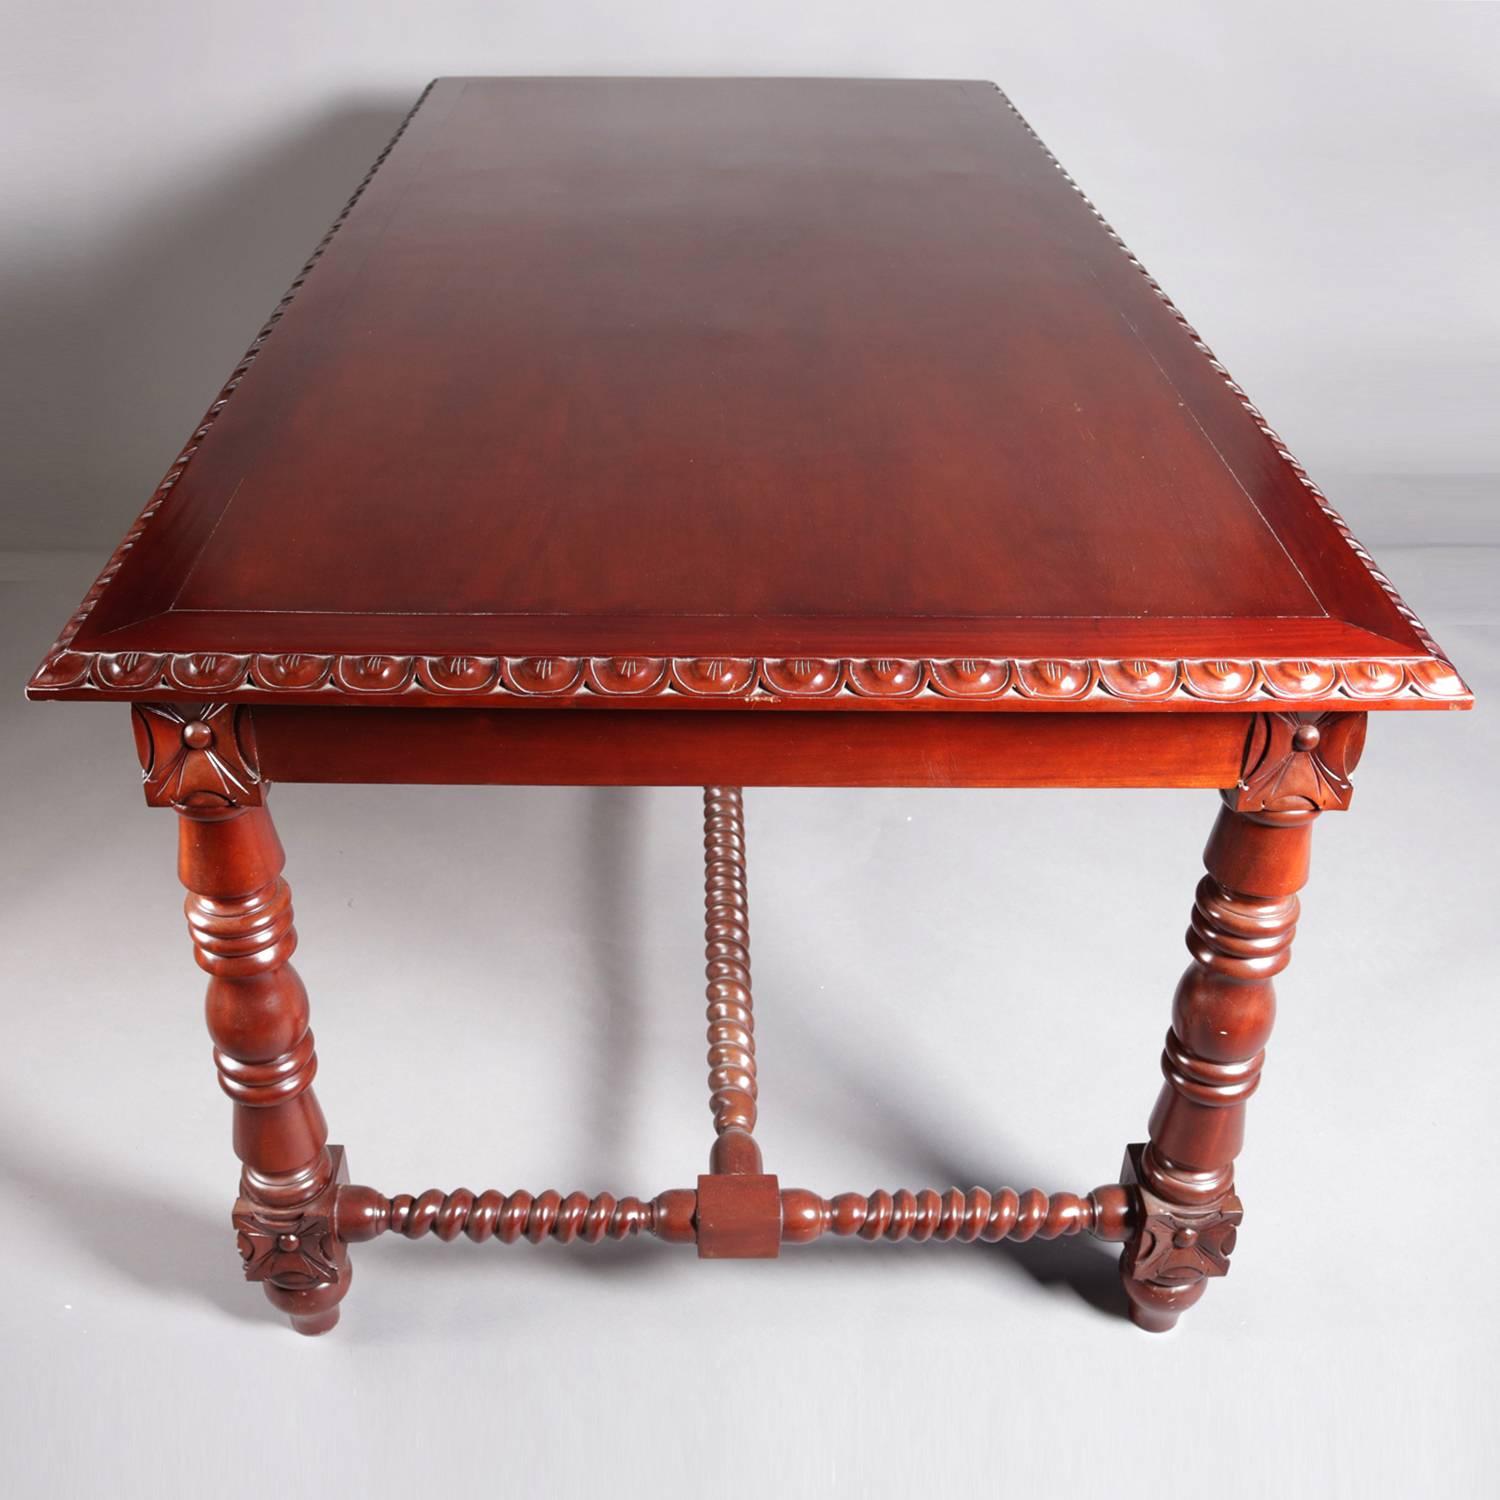 20th Century French Carved Mahogany Barley Twist & Rosette Conference or Dining Table 20th C